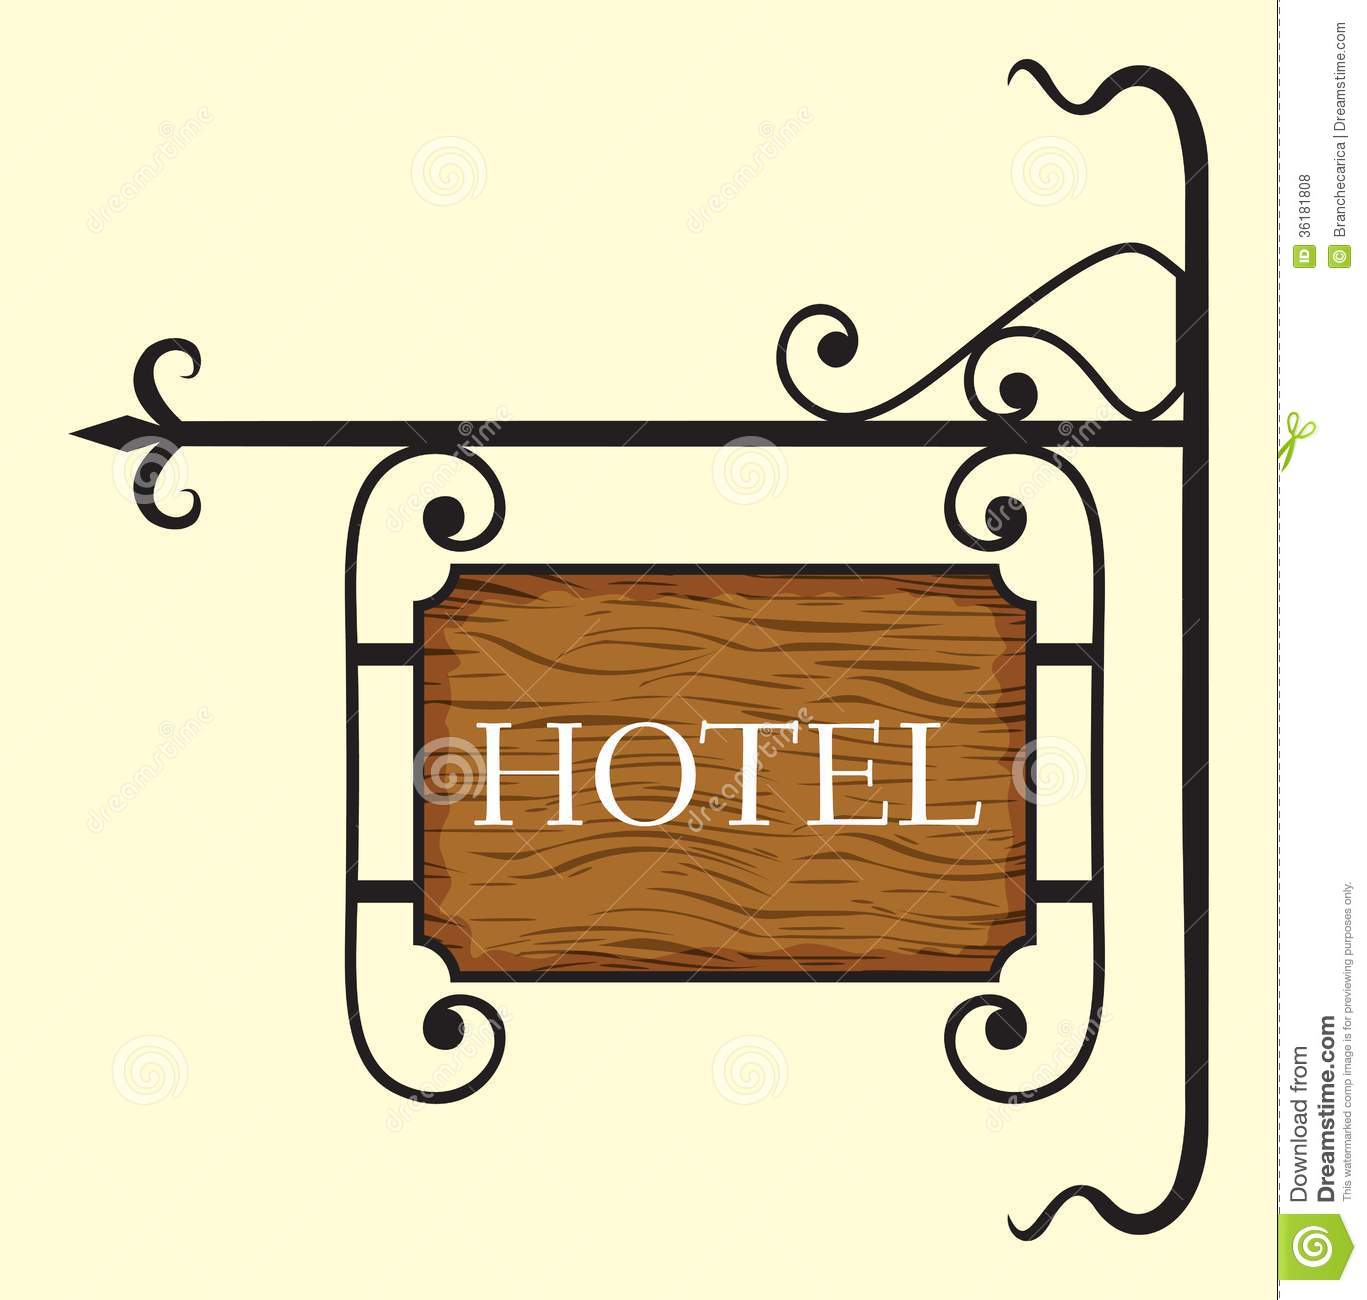 Hotel Clipart Images 2015